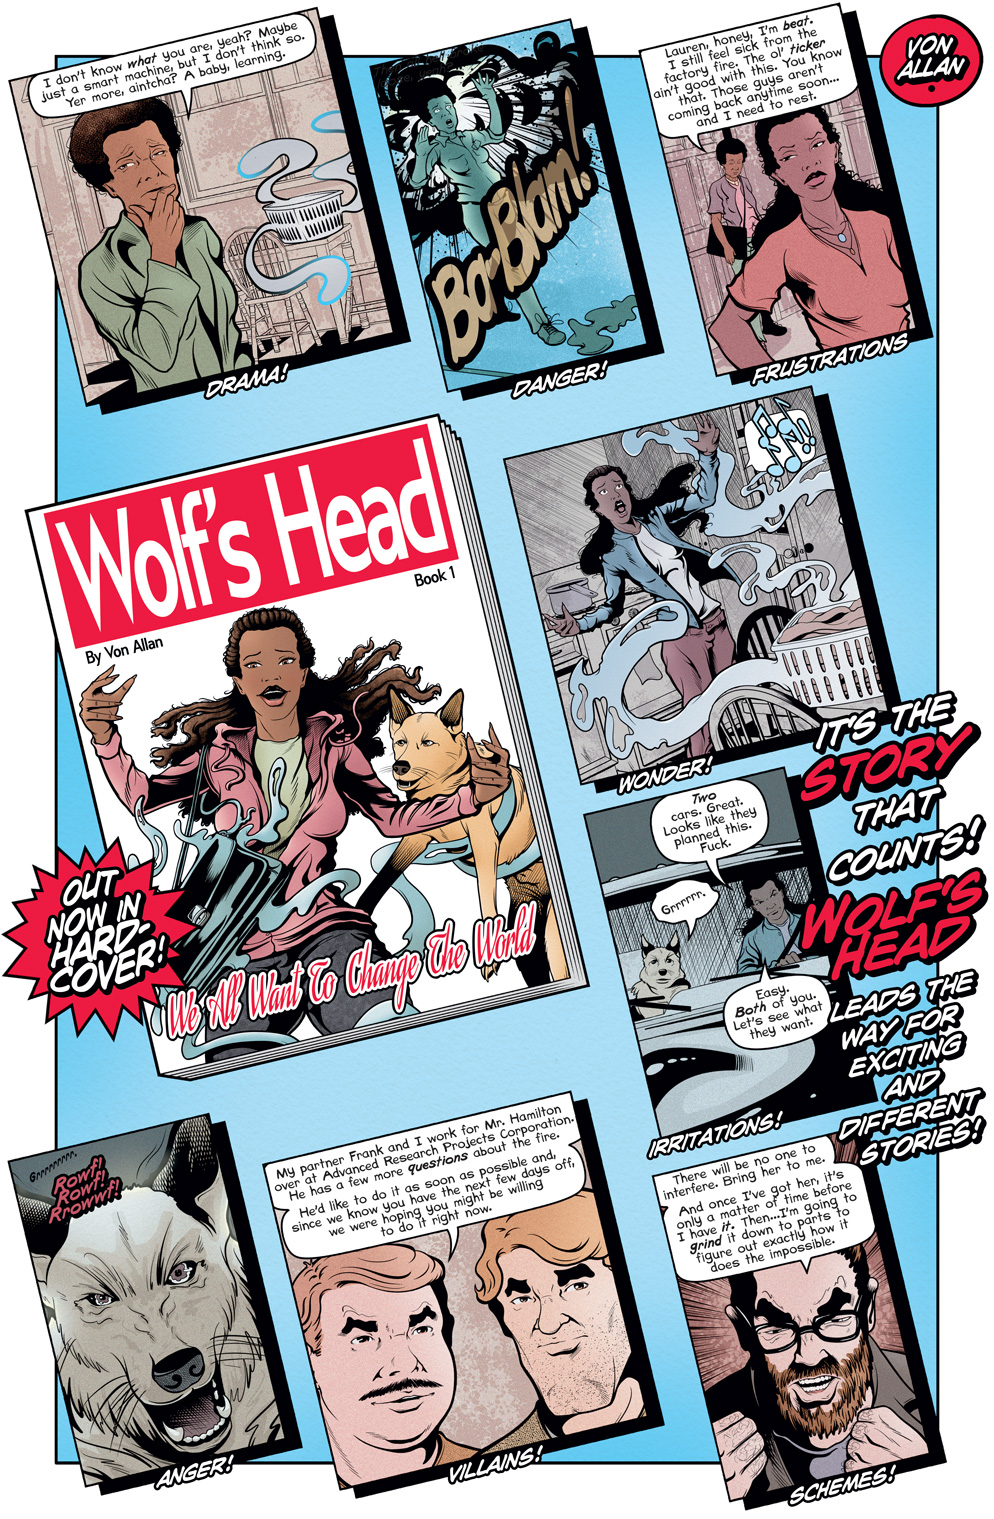 Wolf's Head Book 1 teaser that showcases art and writing from the hardcover graphic novel